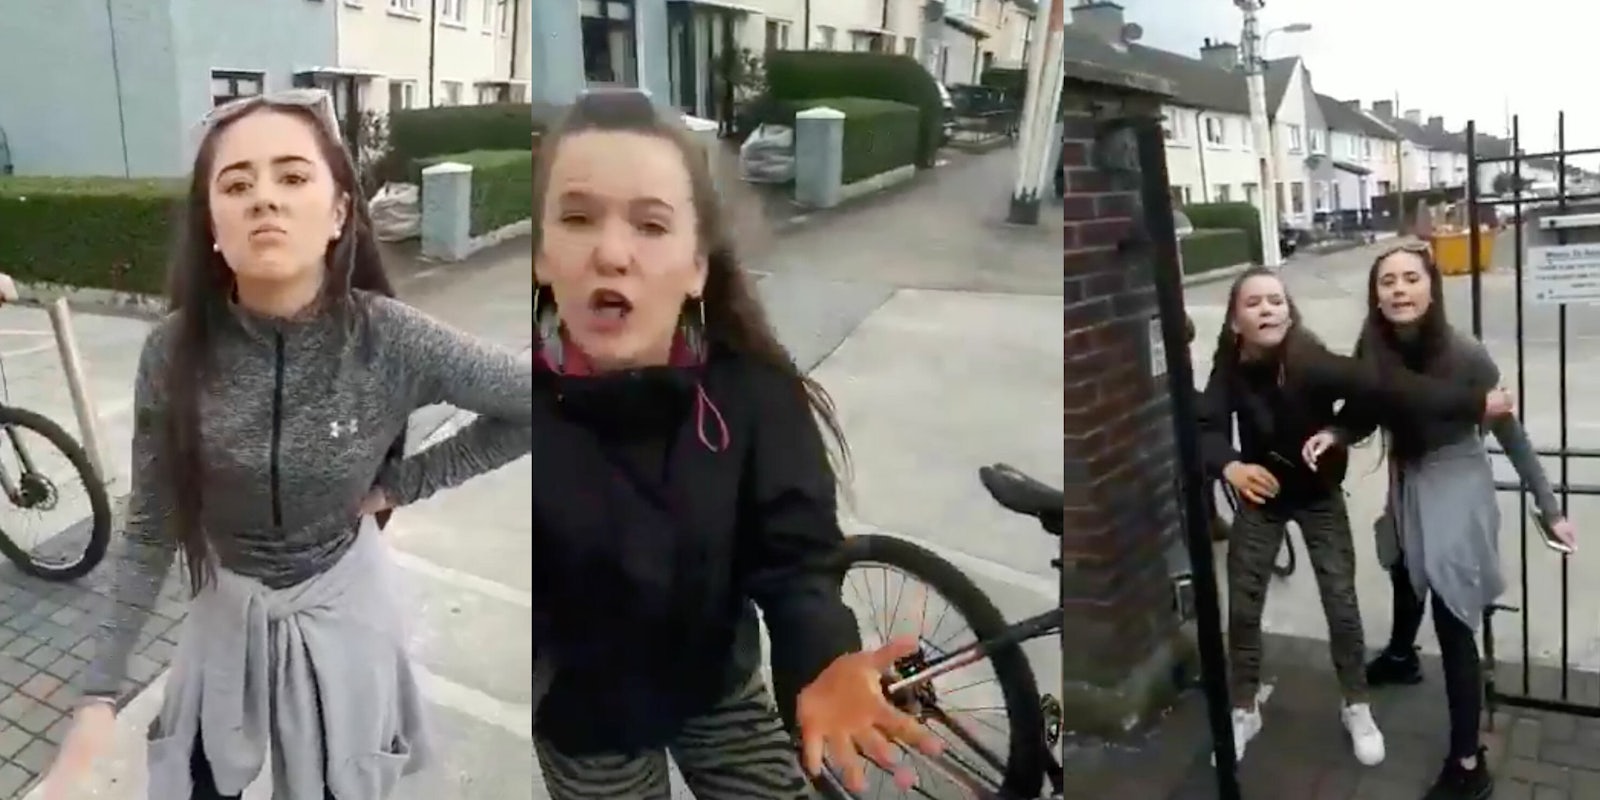 Three photos side by side show two girls caught on video verbally assaulting a Mexican man in Dublin